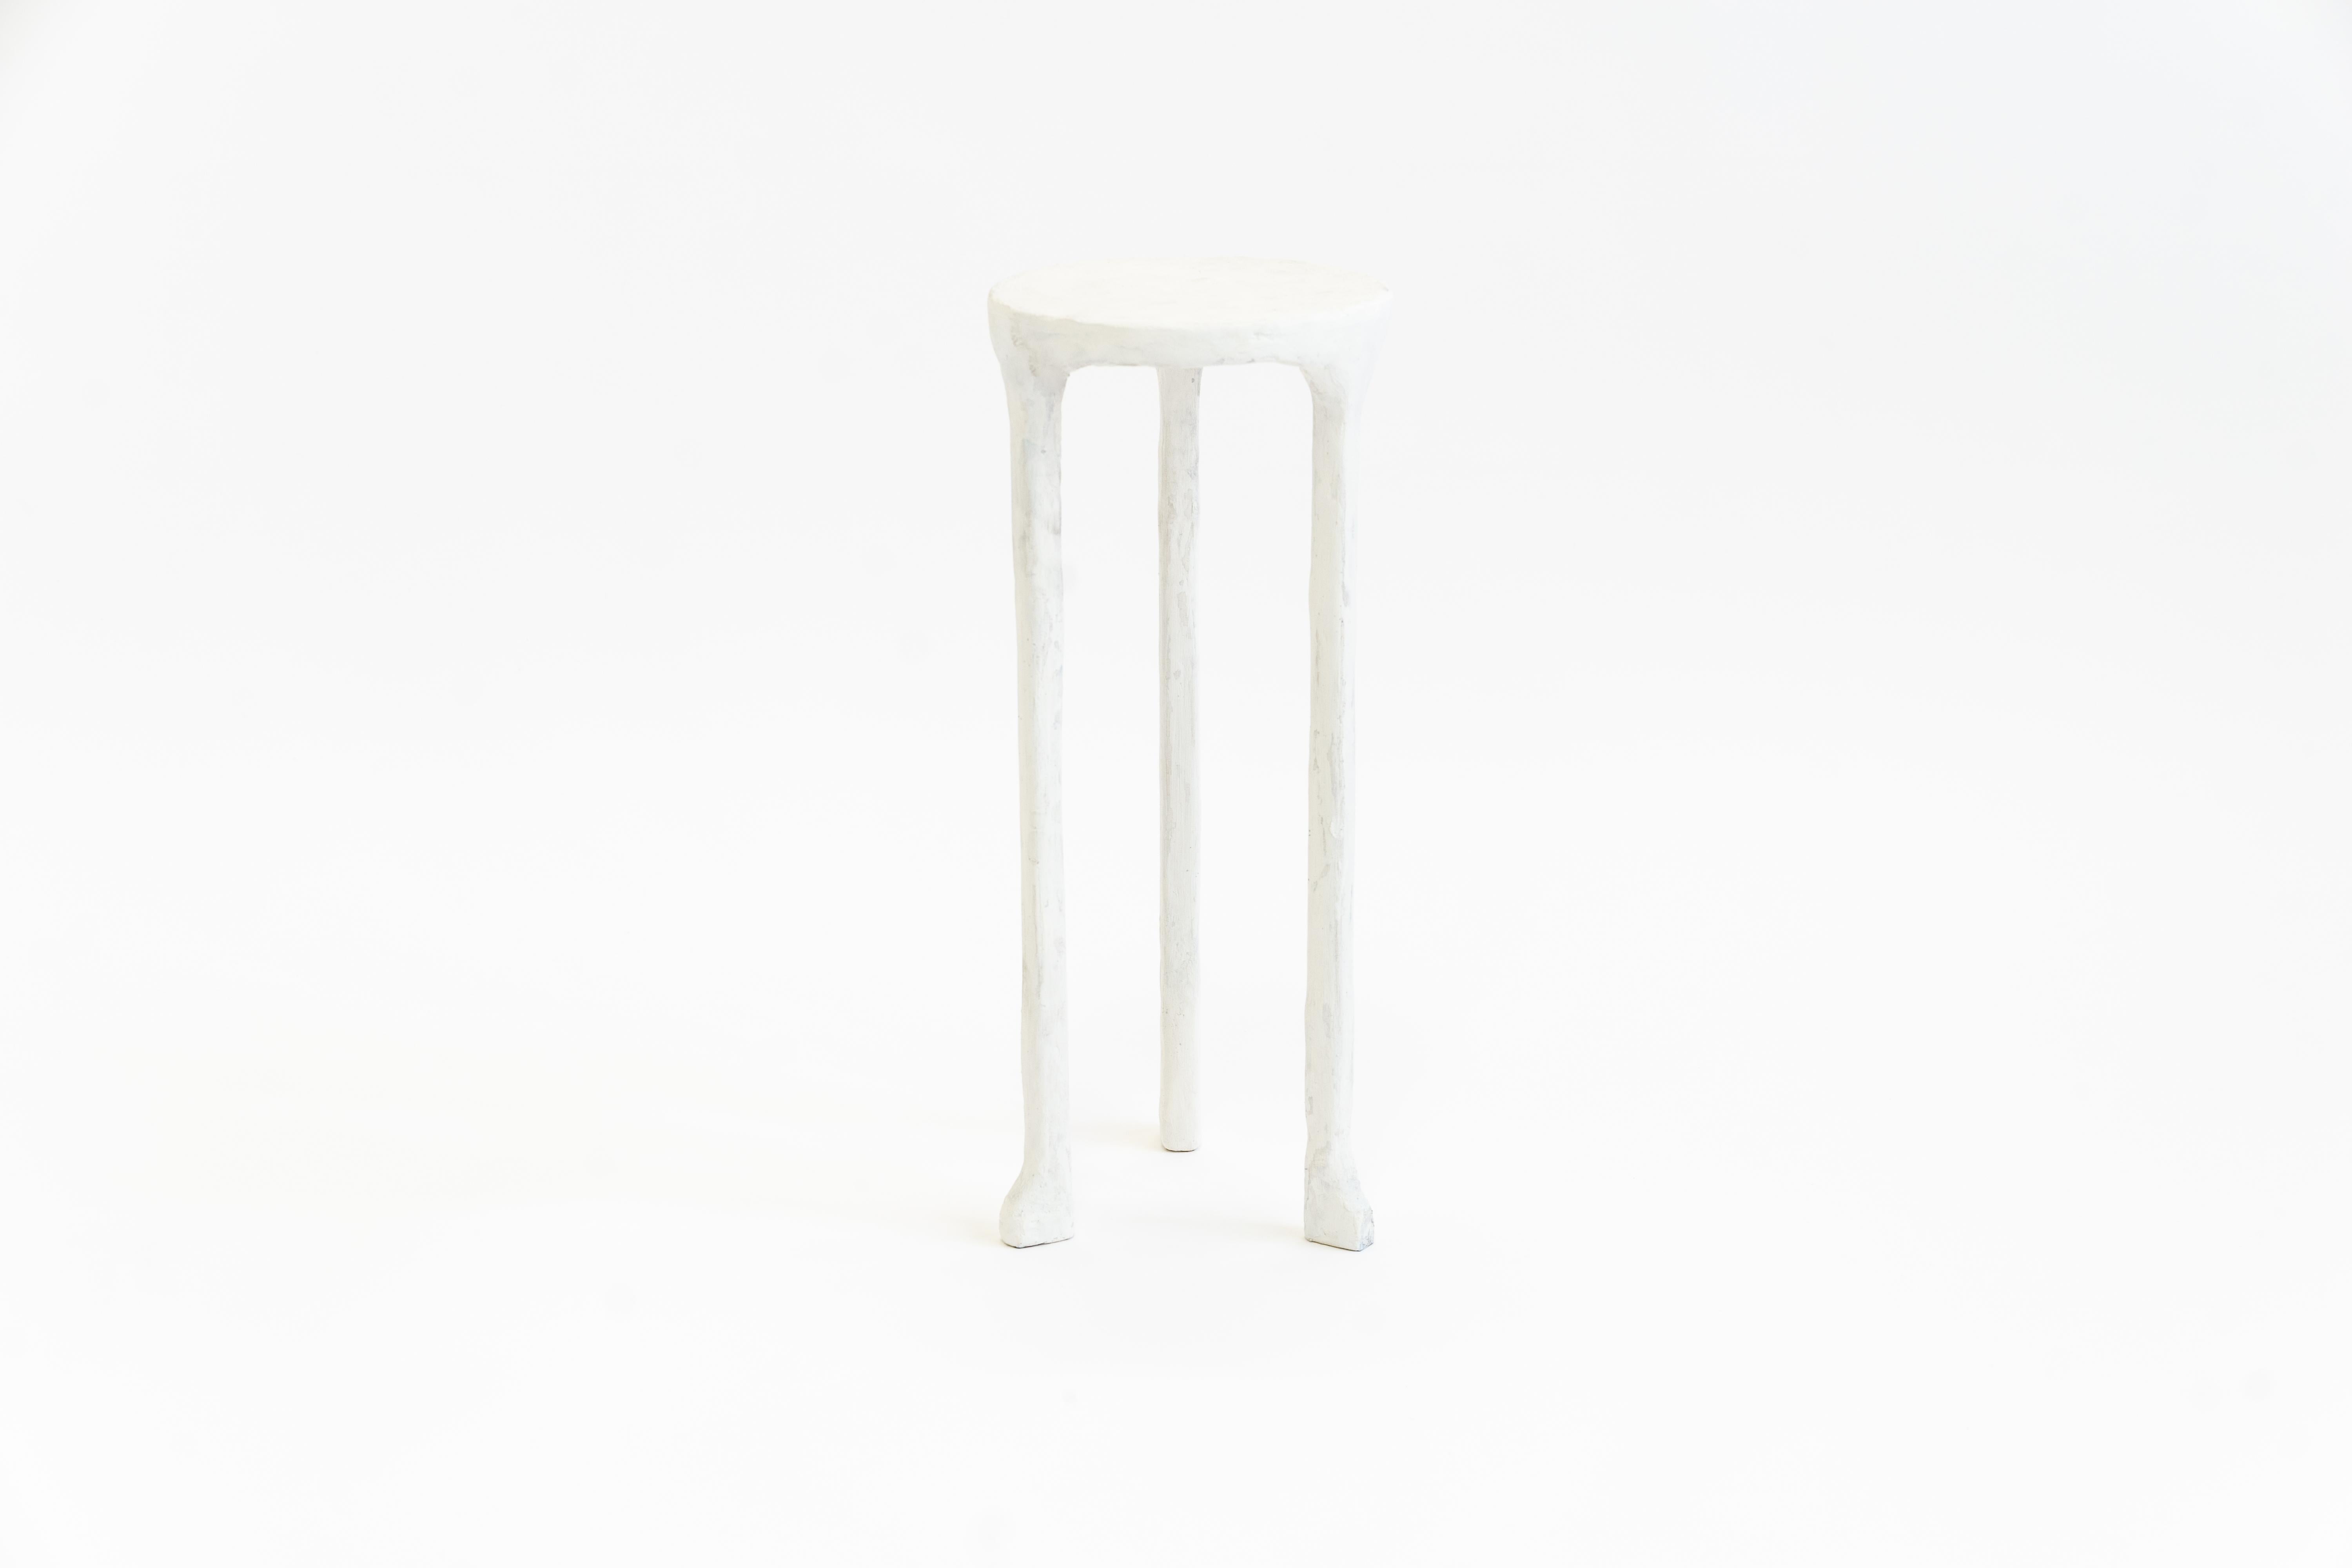 Table No. 3 plaster by JM Szymanski
Dimensions: R 8” x H 20”
Materials: Carved steel, plaster finish

Our classic side table is hand plastered adding texture and depth to an already beautiful design.

Jake Szymanski lives and designs in New